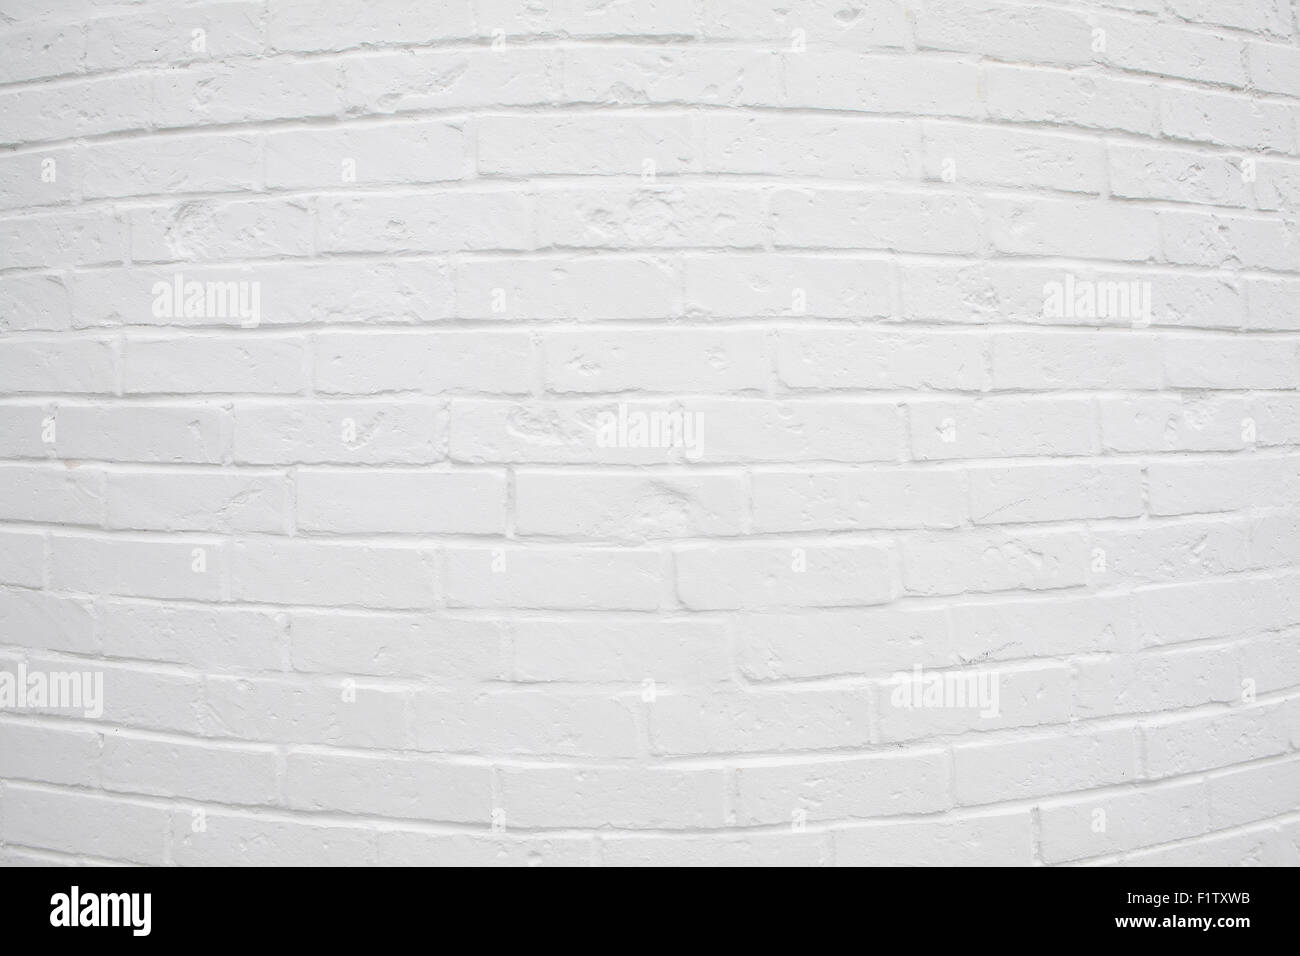 White painted brick wall with rounded curved in the center. Background use. Stock Photo